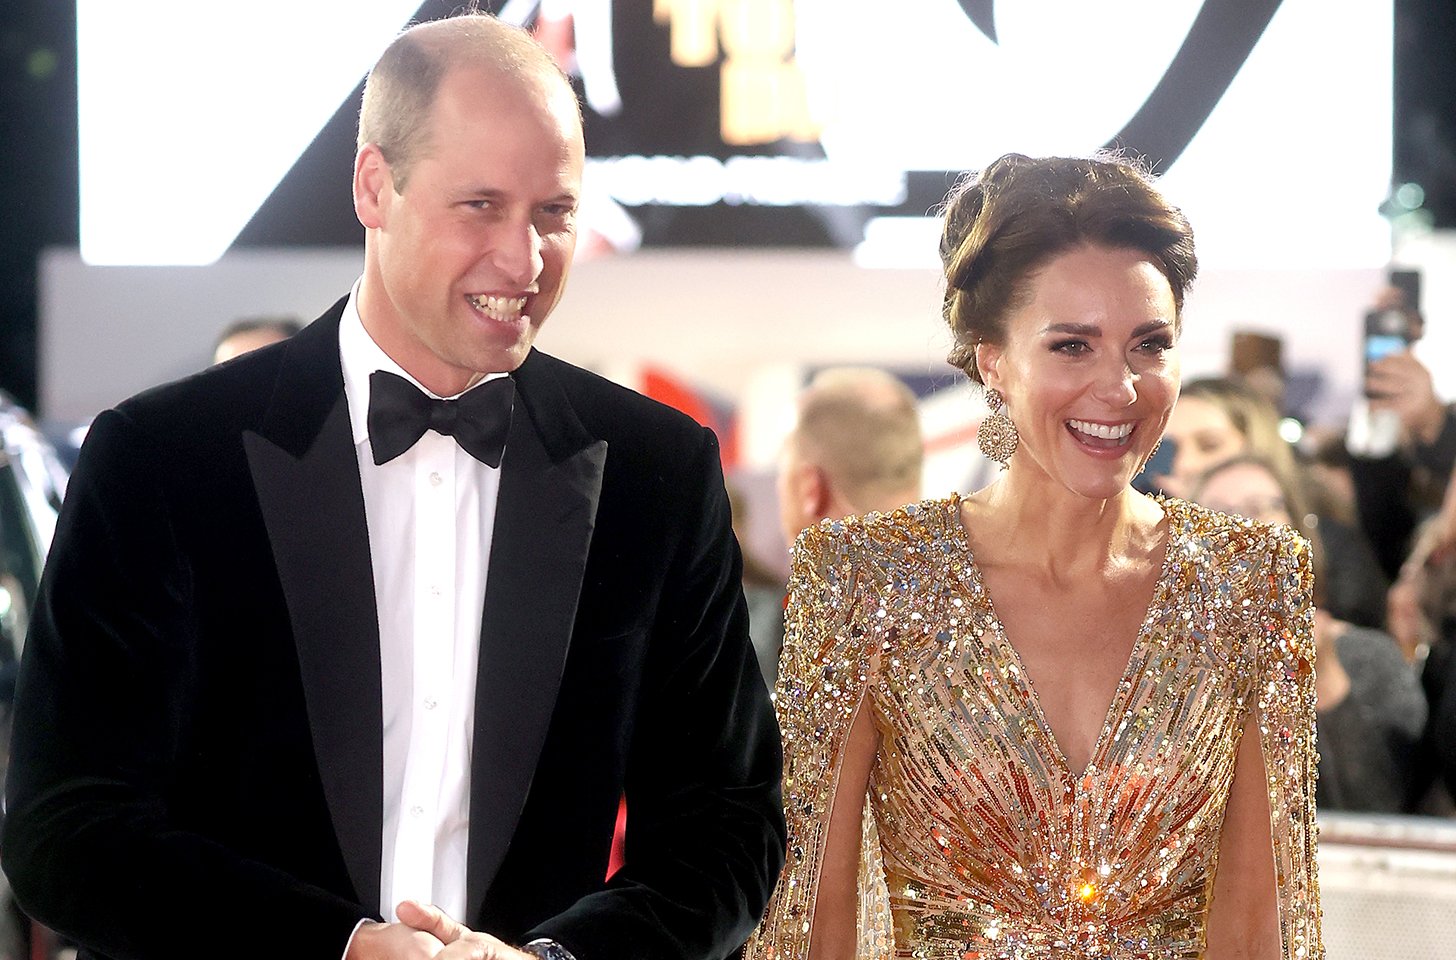 Kate Middleton Stuns in Golden Dress At ‘No Time To Die’ Premiere